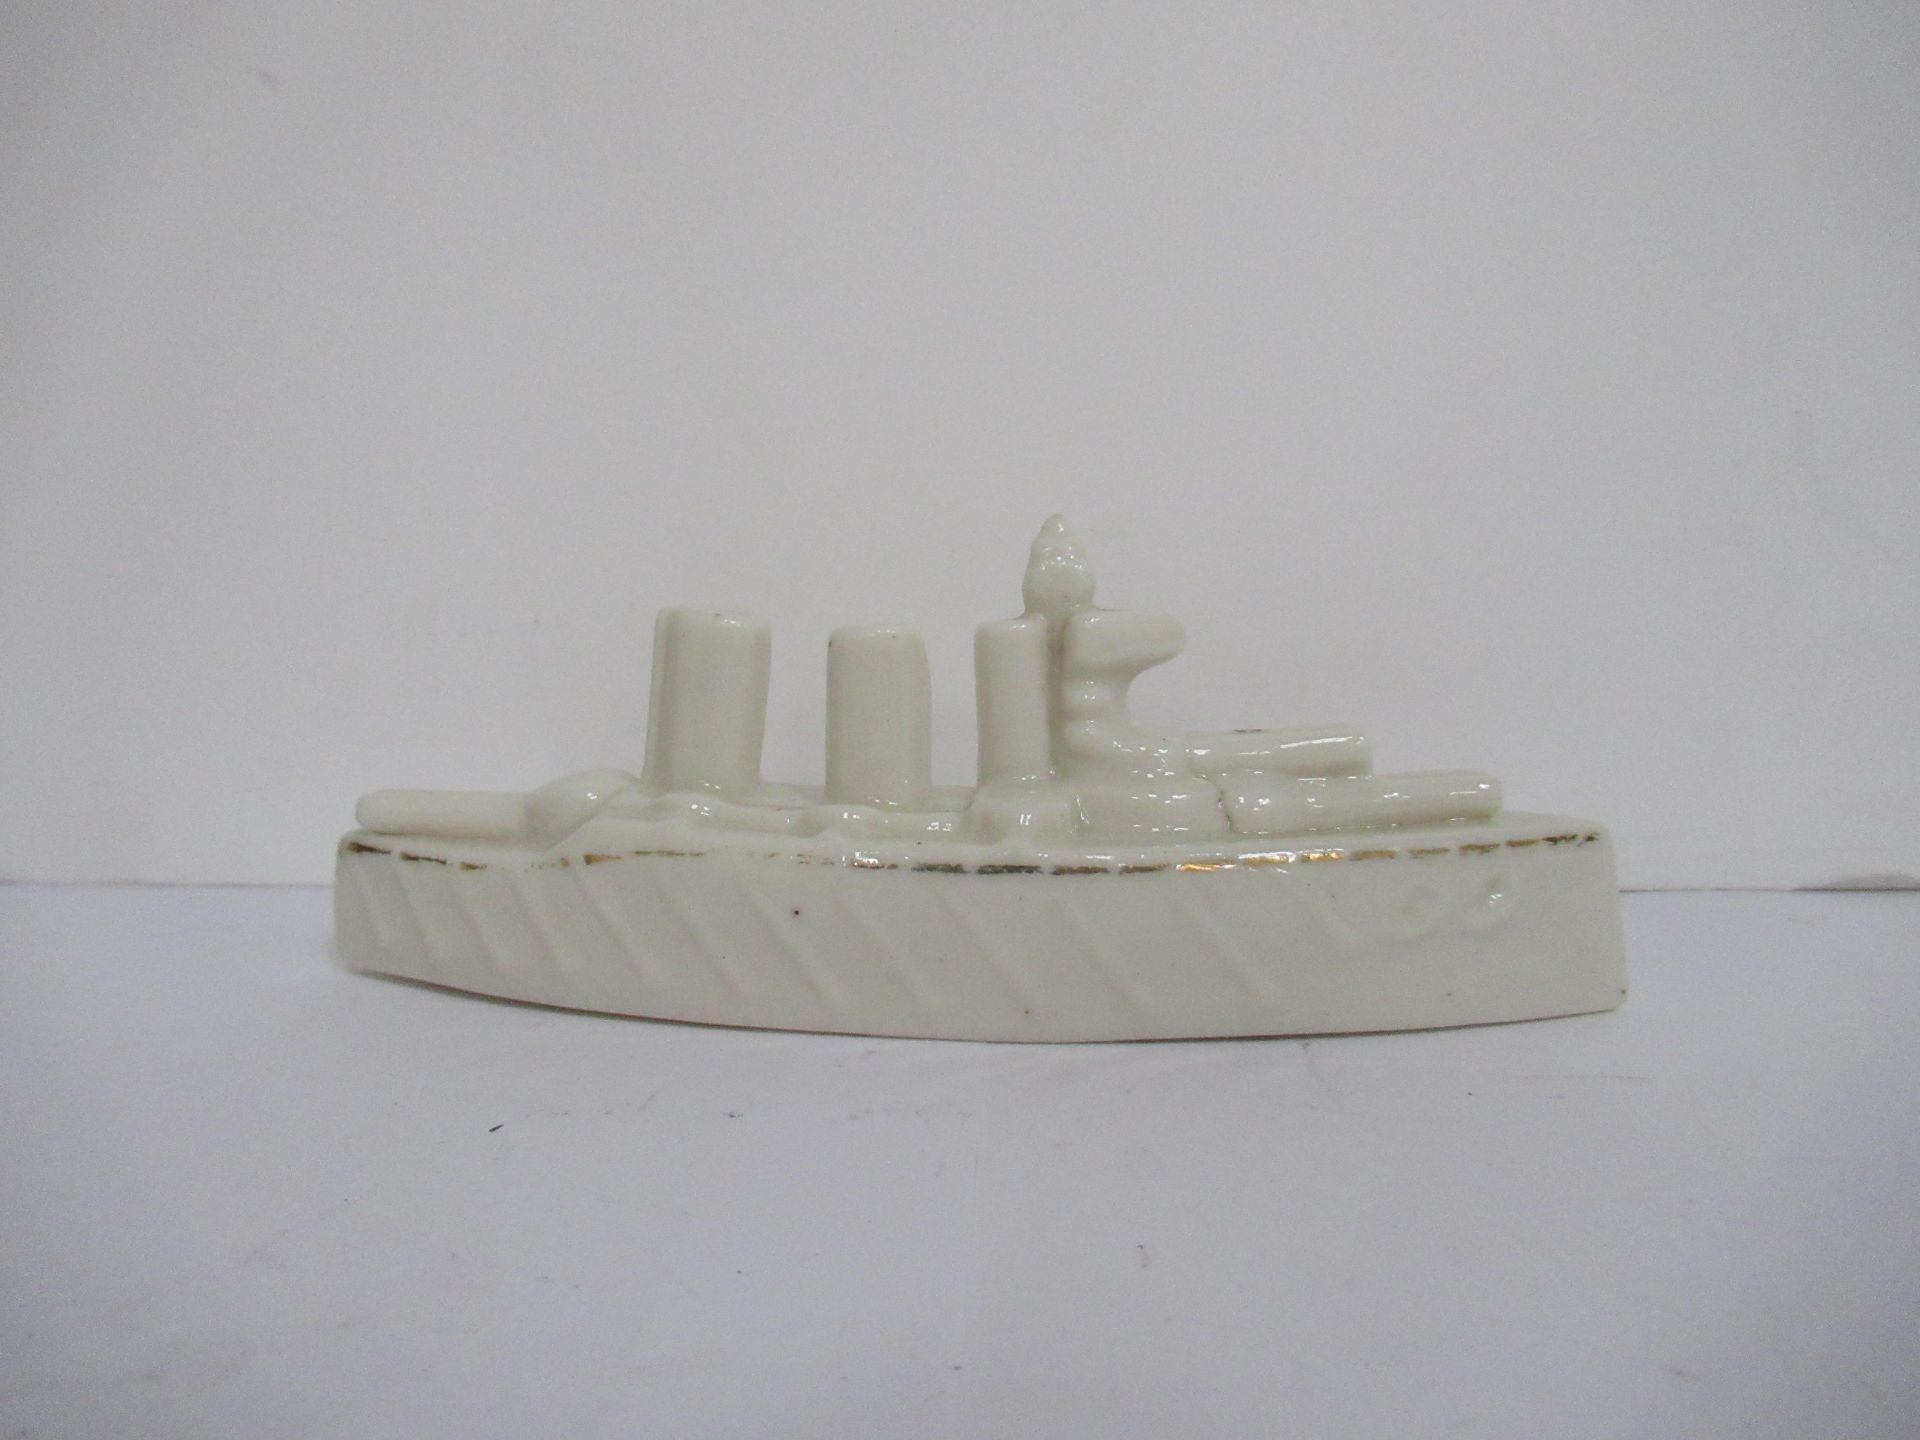 Crested China model of battleship with Cleethorpes coat of arms (120mm x 65mm) - Bild 3 aus 8